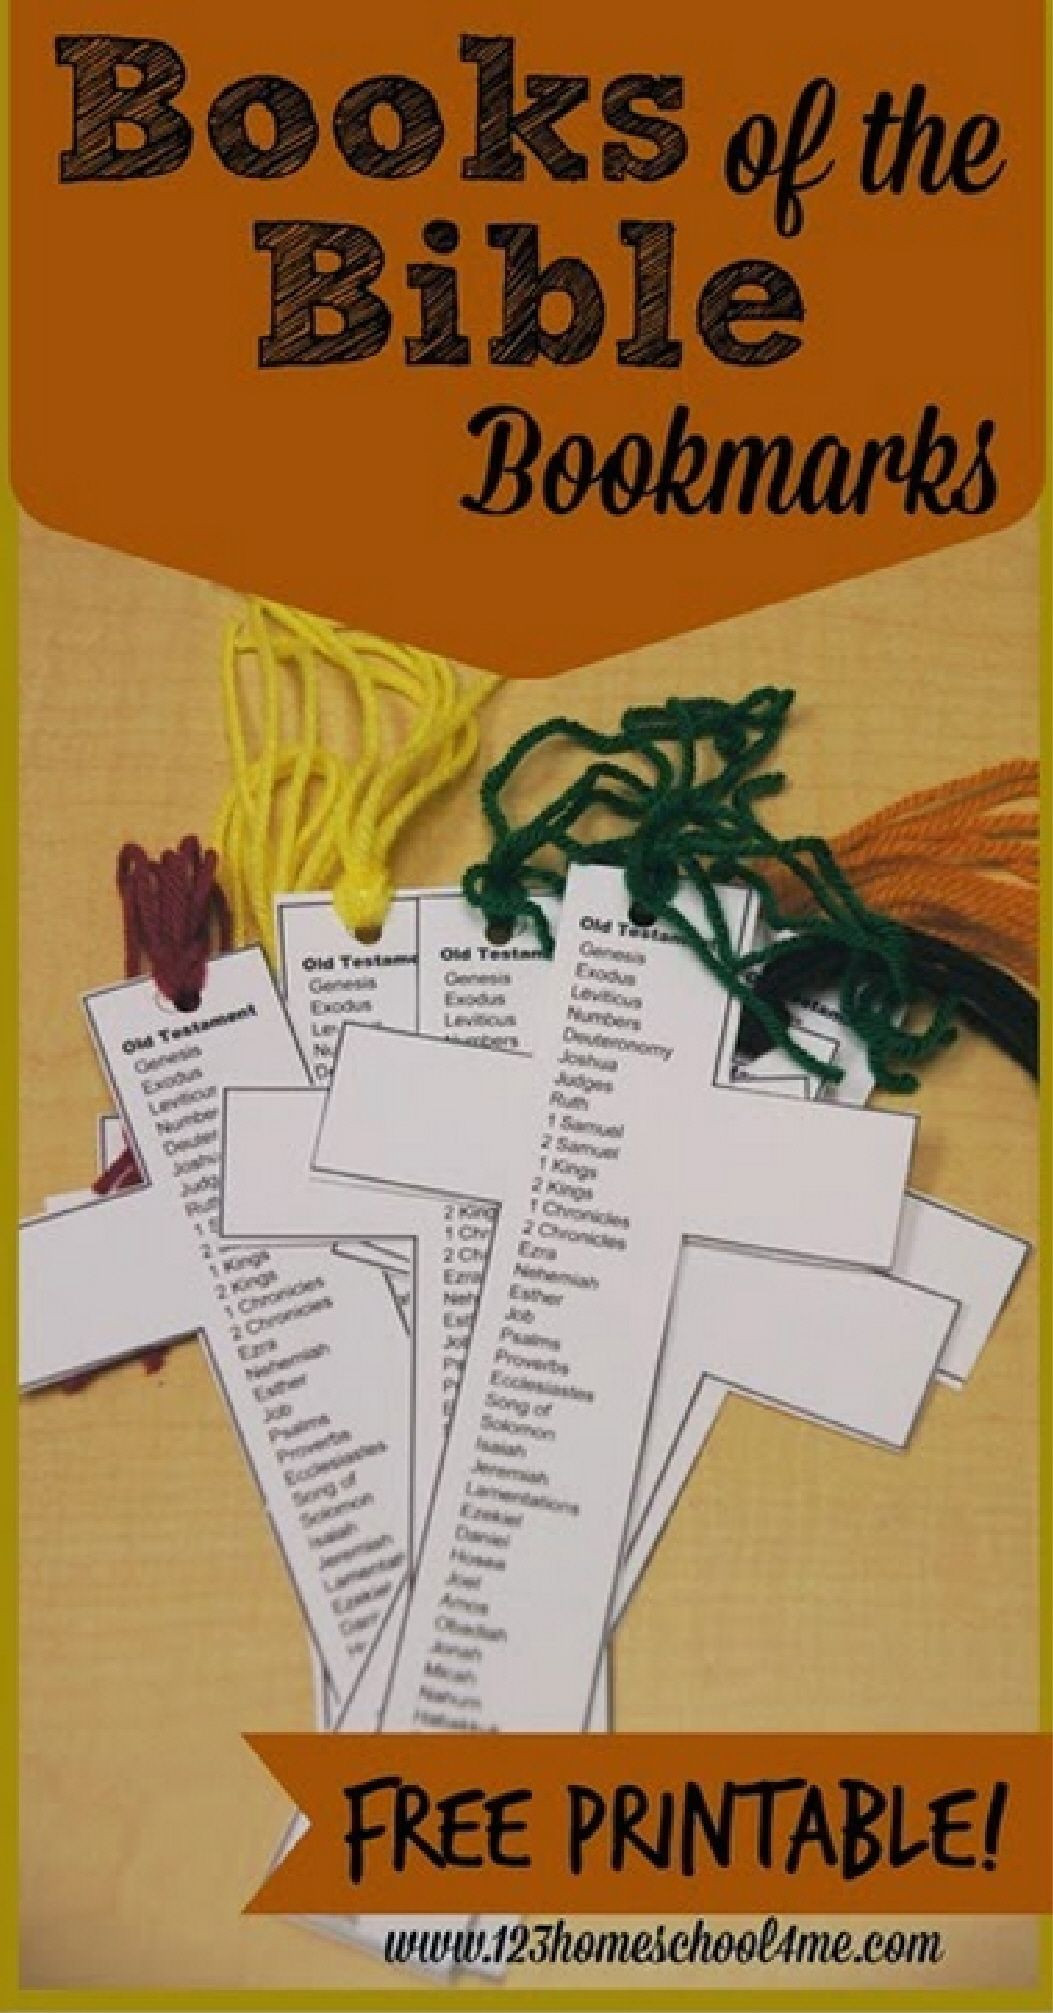 Bible Crafts For Preschoolers Free
 Free Books of the Bible Bookmark